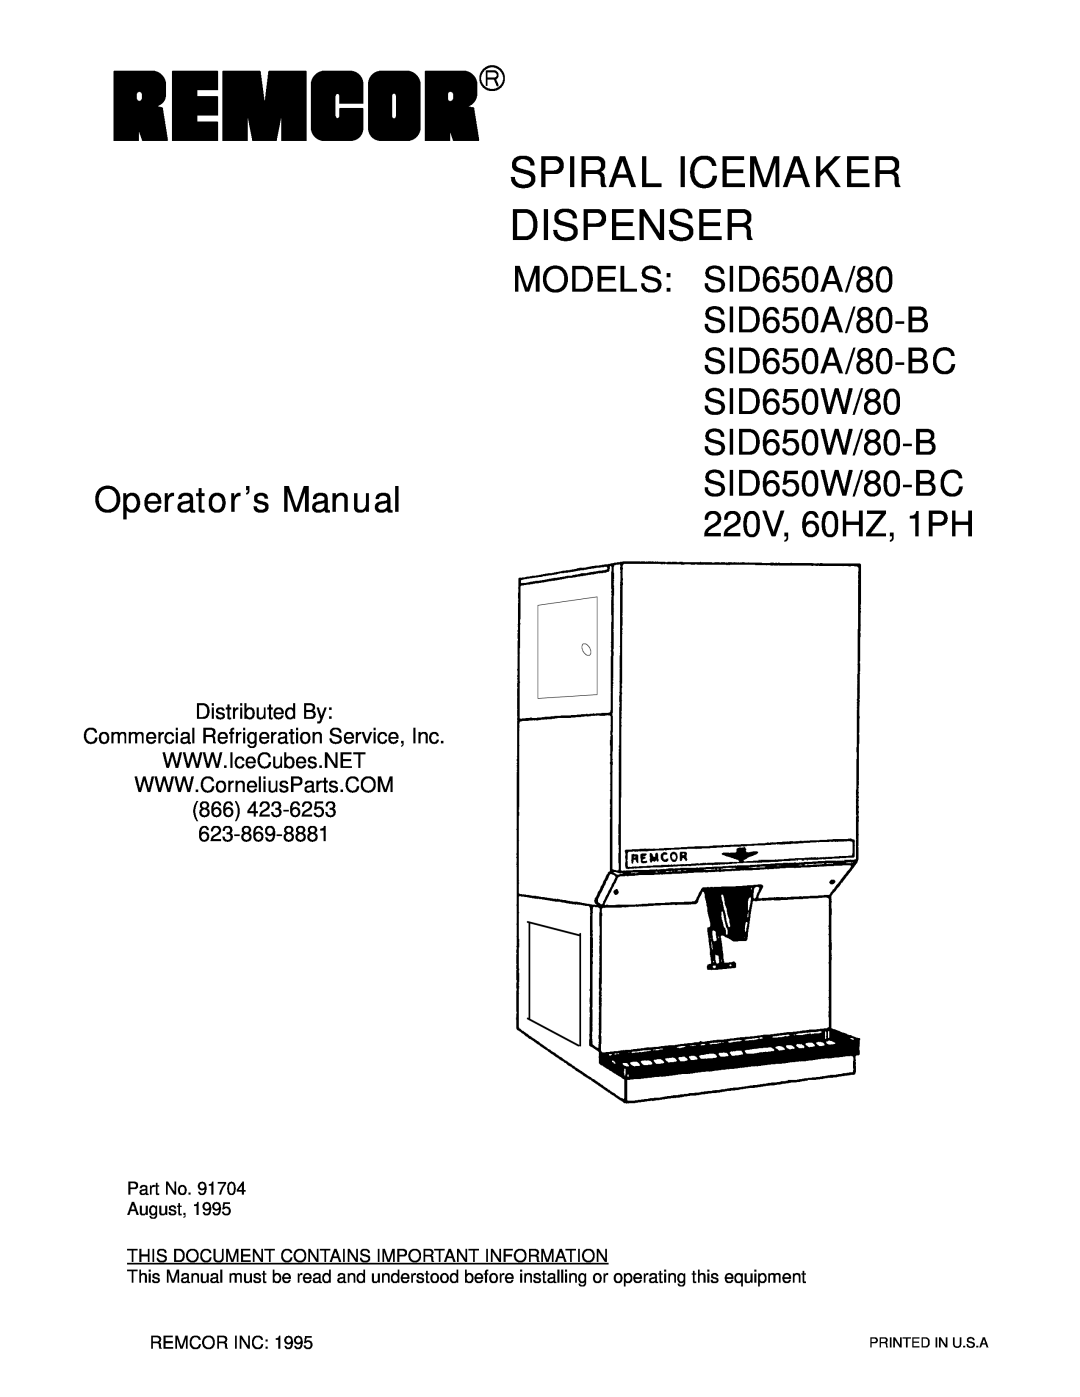 Cornelius SID650A/80-B, SID650W/80 manual Distributed By Commercial Refrigeration Service, Inc, Spiral Icemaker Dispenser 